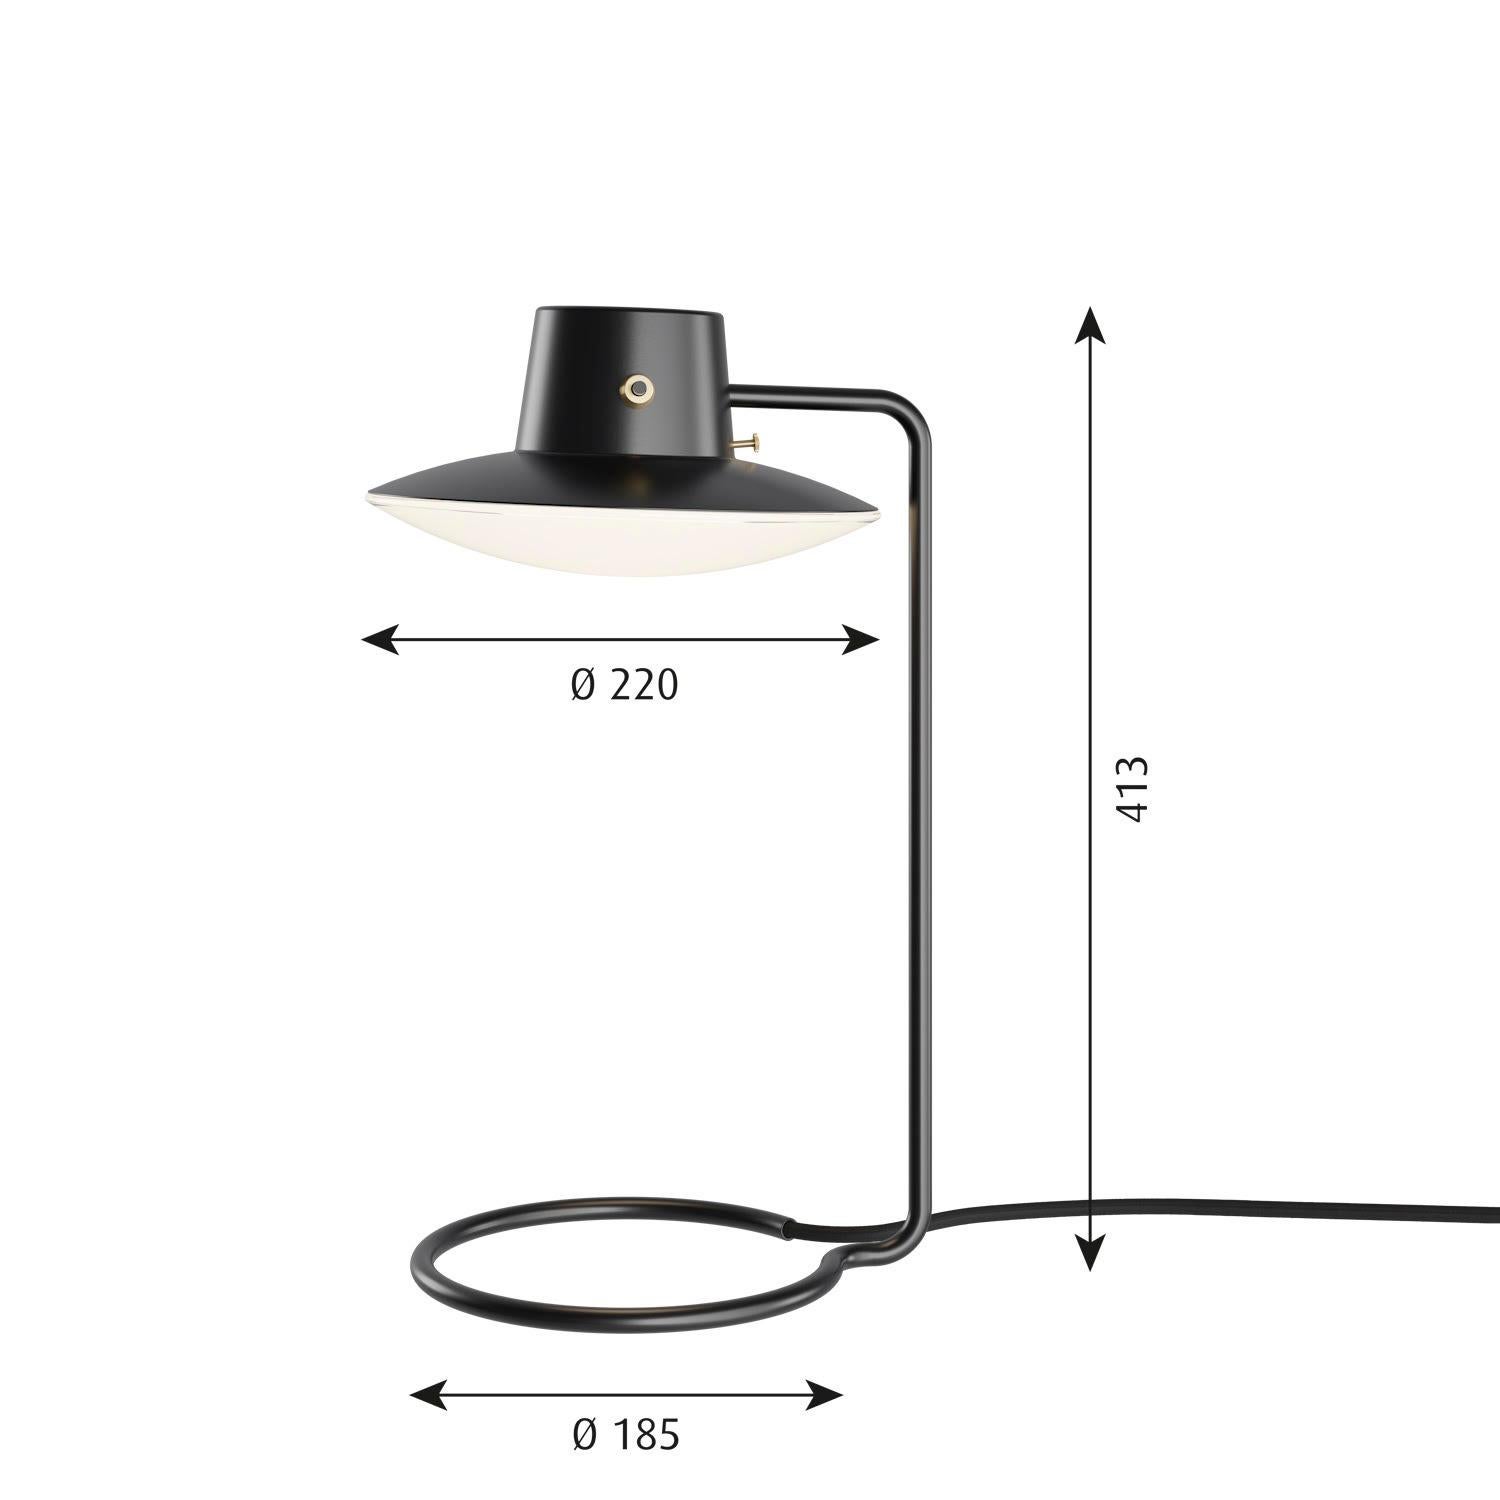 Table lamp model AJ Oxford by Louis Poulsen 

Table lamp model AJ Oxford by Louis Poulsen. Designer Arne Jacobsen.
The AJ Oxford Table Lamp's graphic style and monochrome colour palette make it a timeless piece that blends perfectly with any